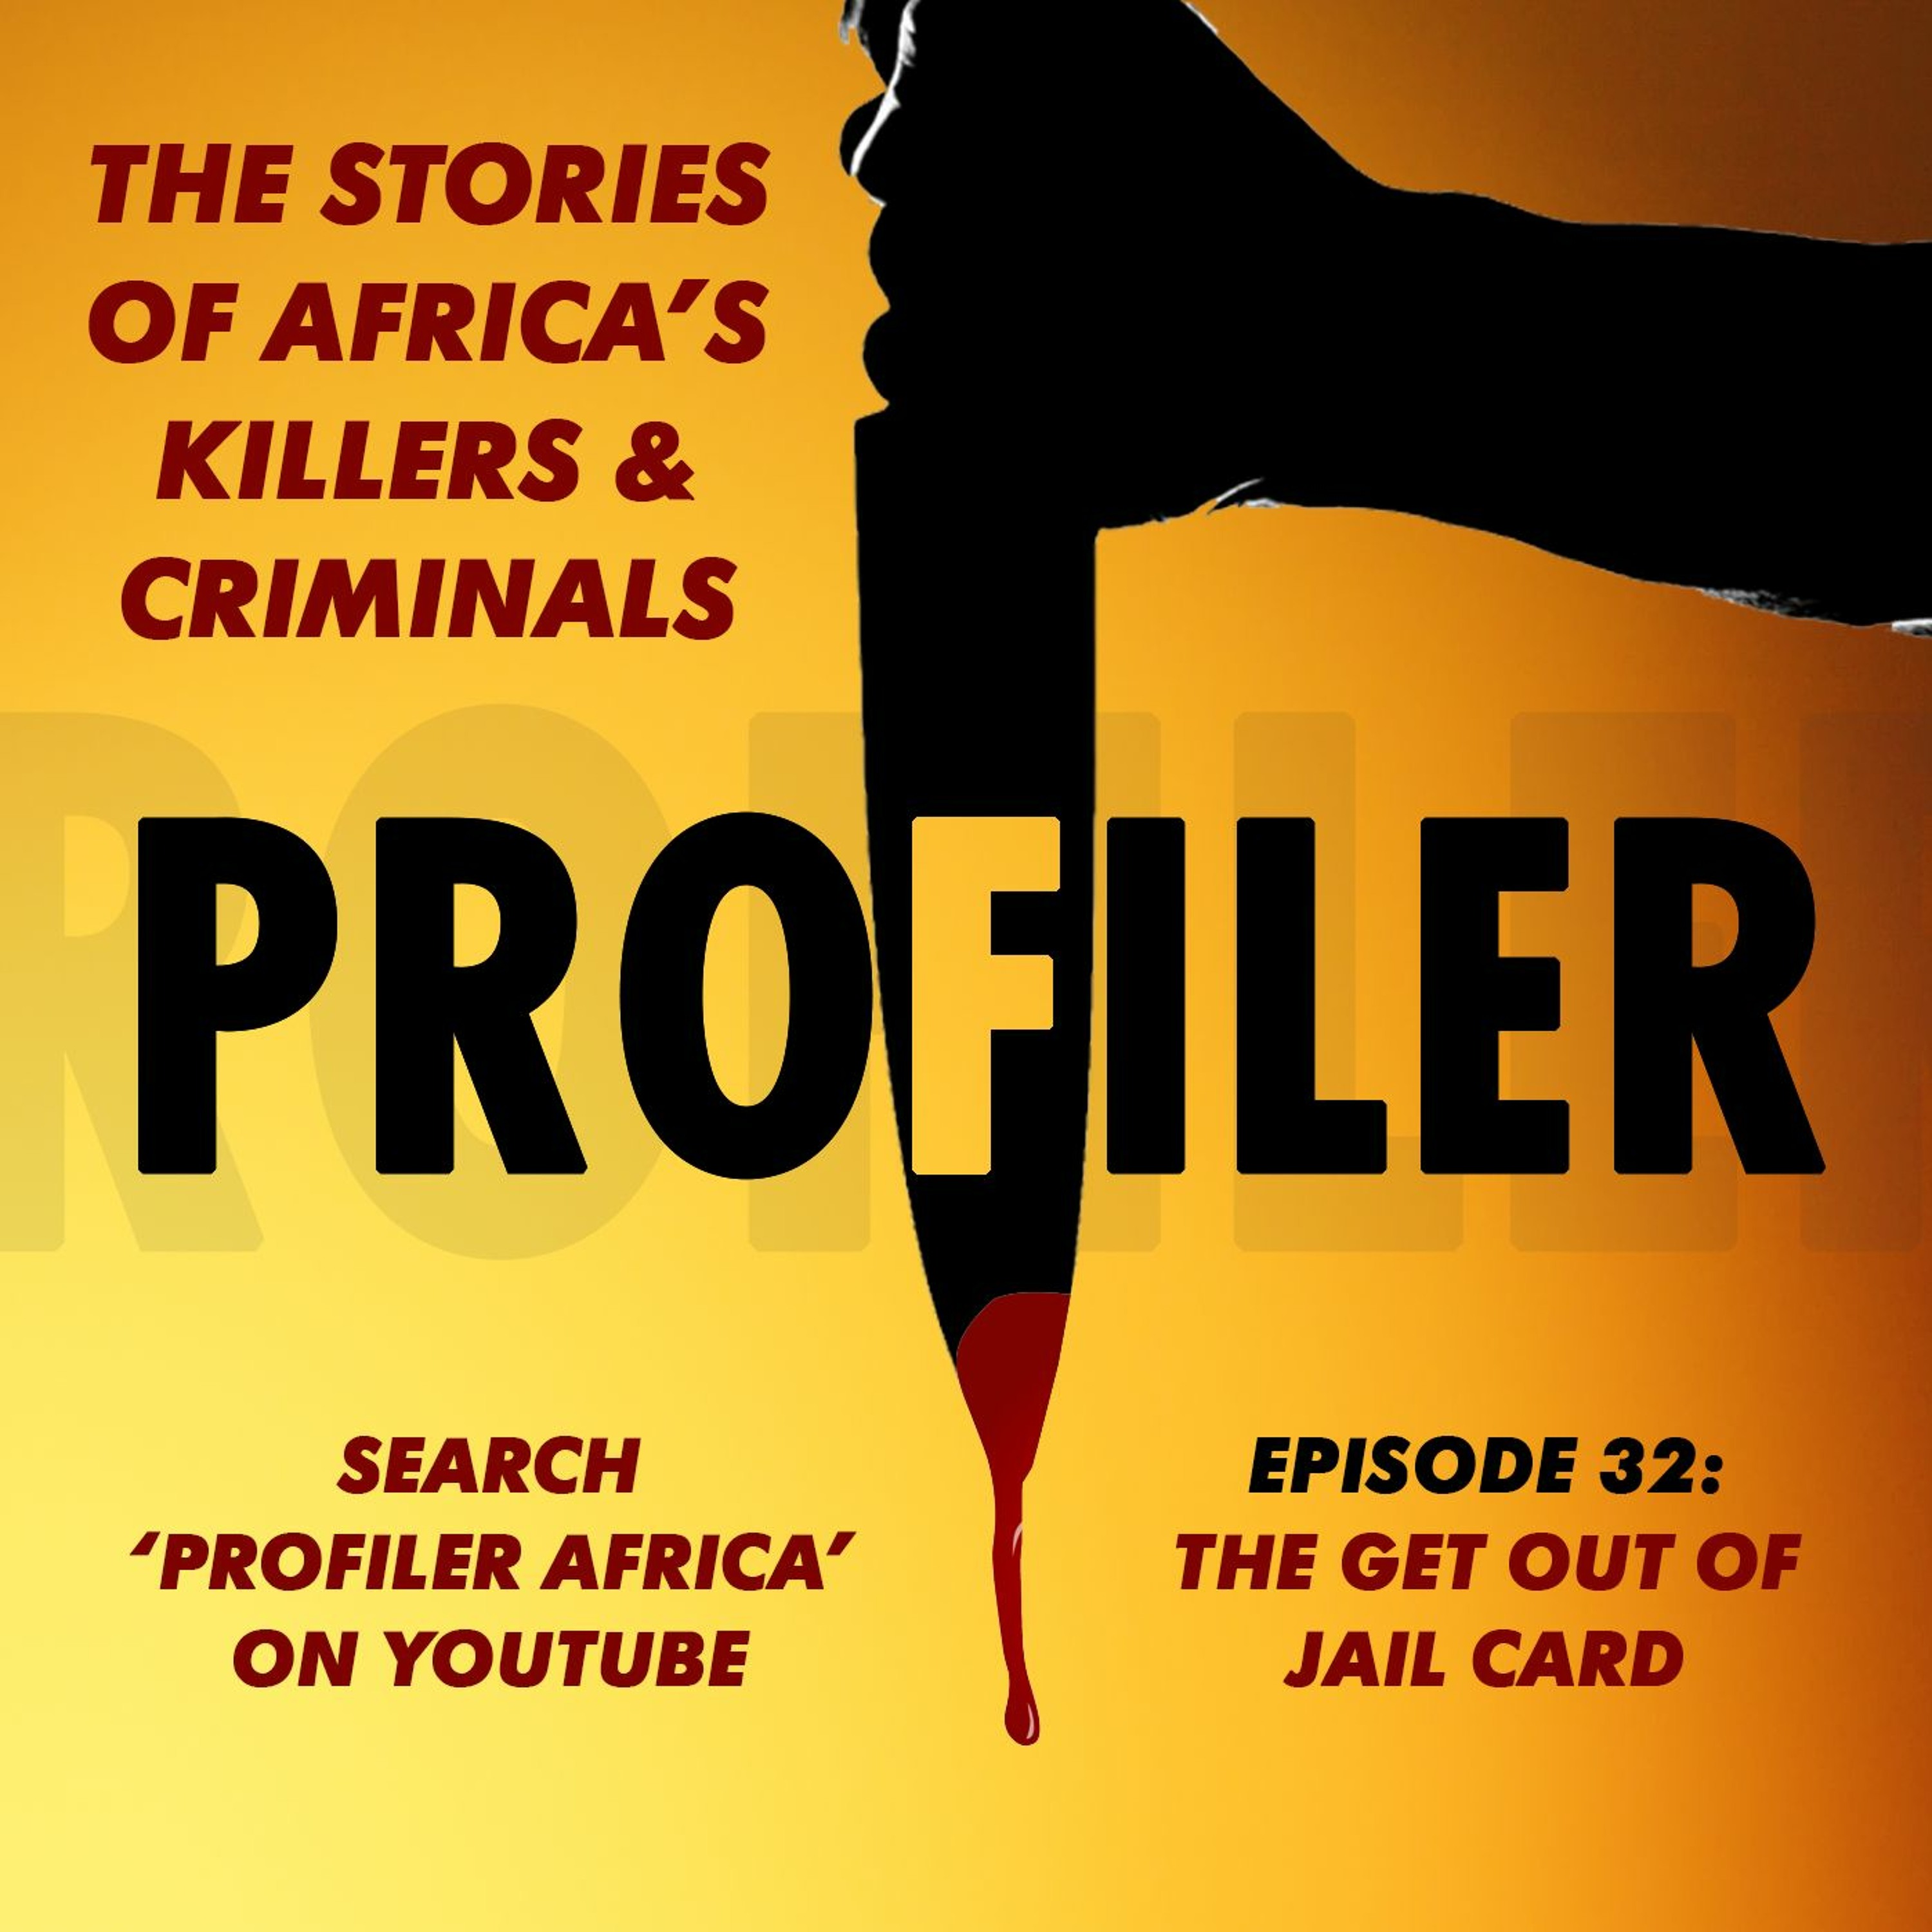 PROFILER Episode 32 - The Get Out Of Jail Card